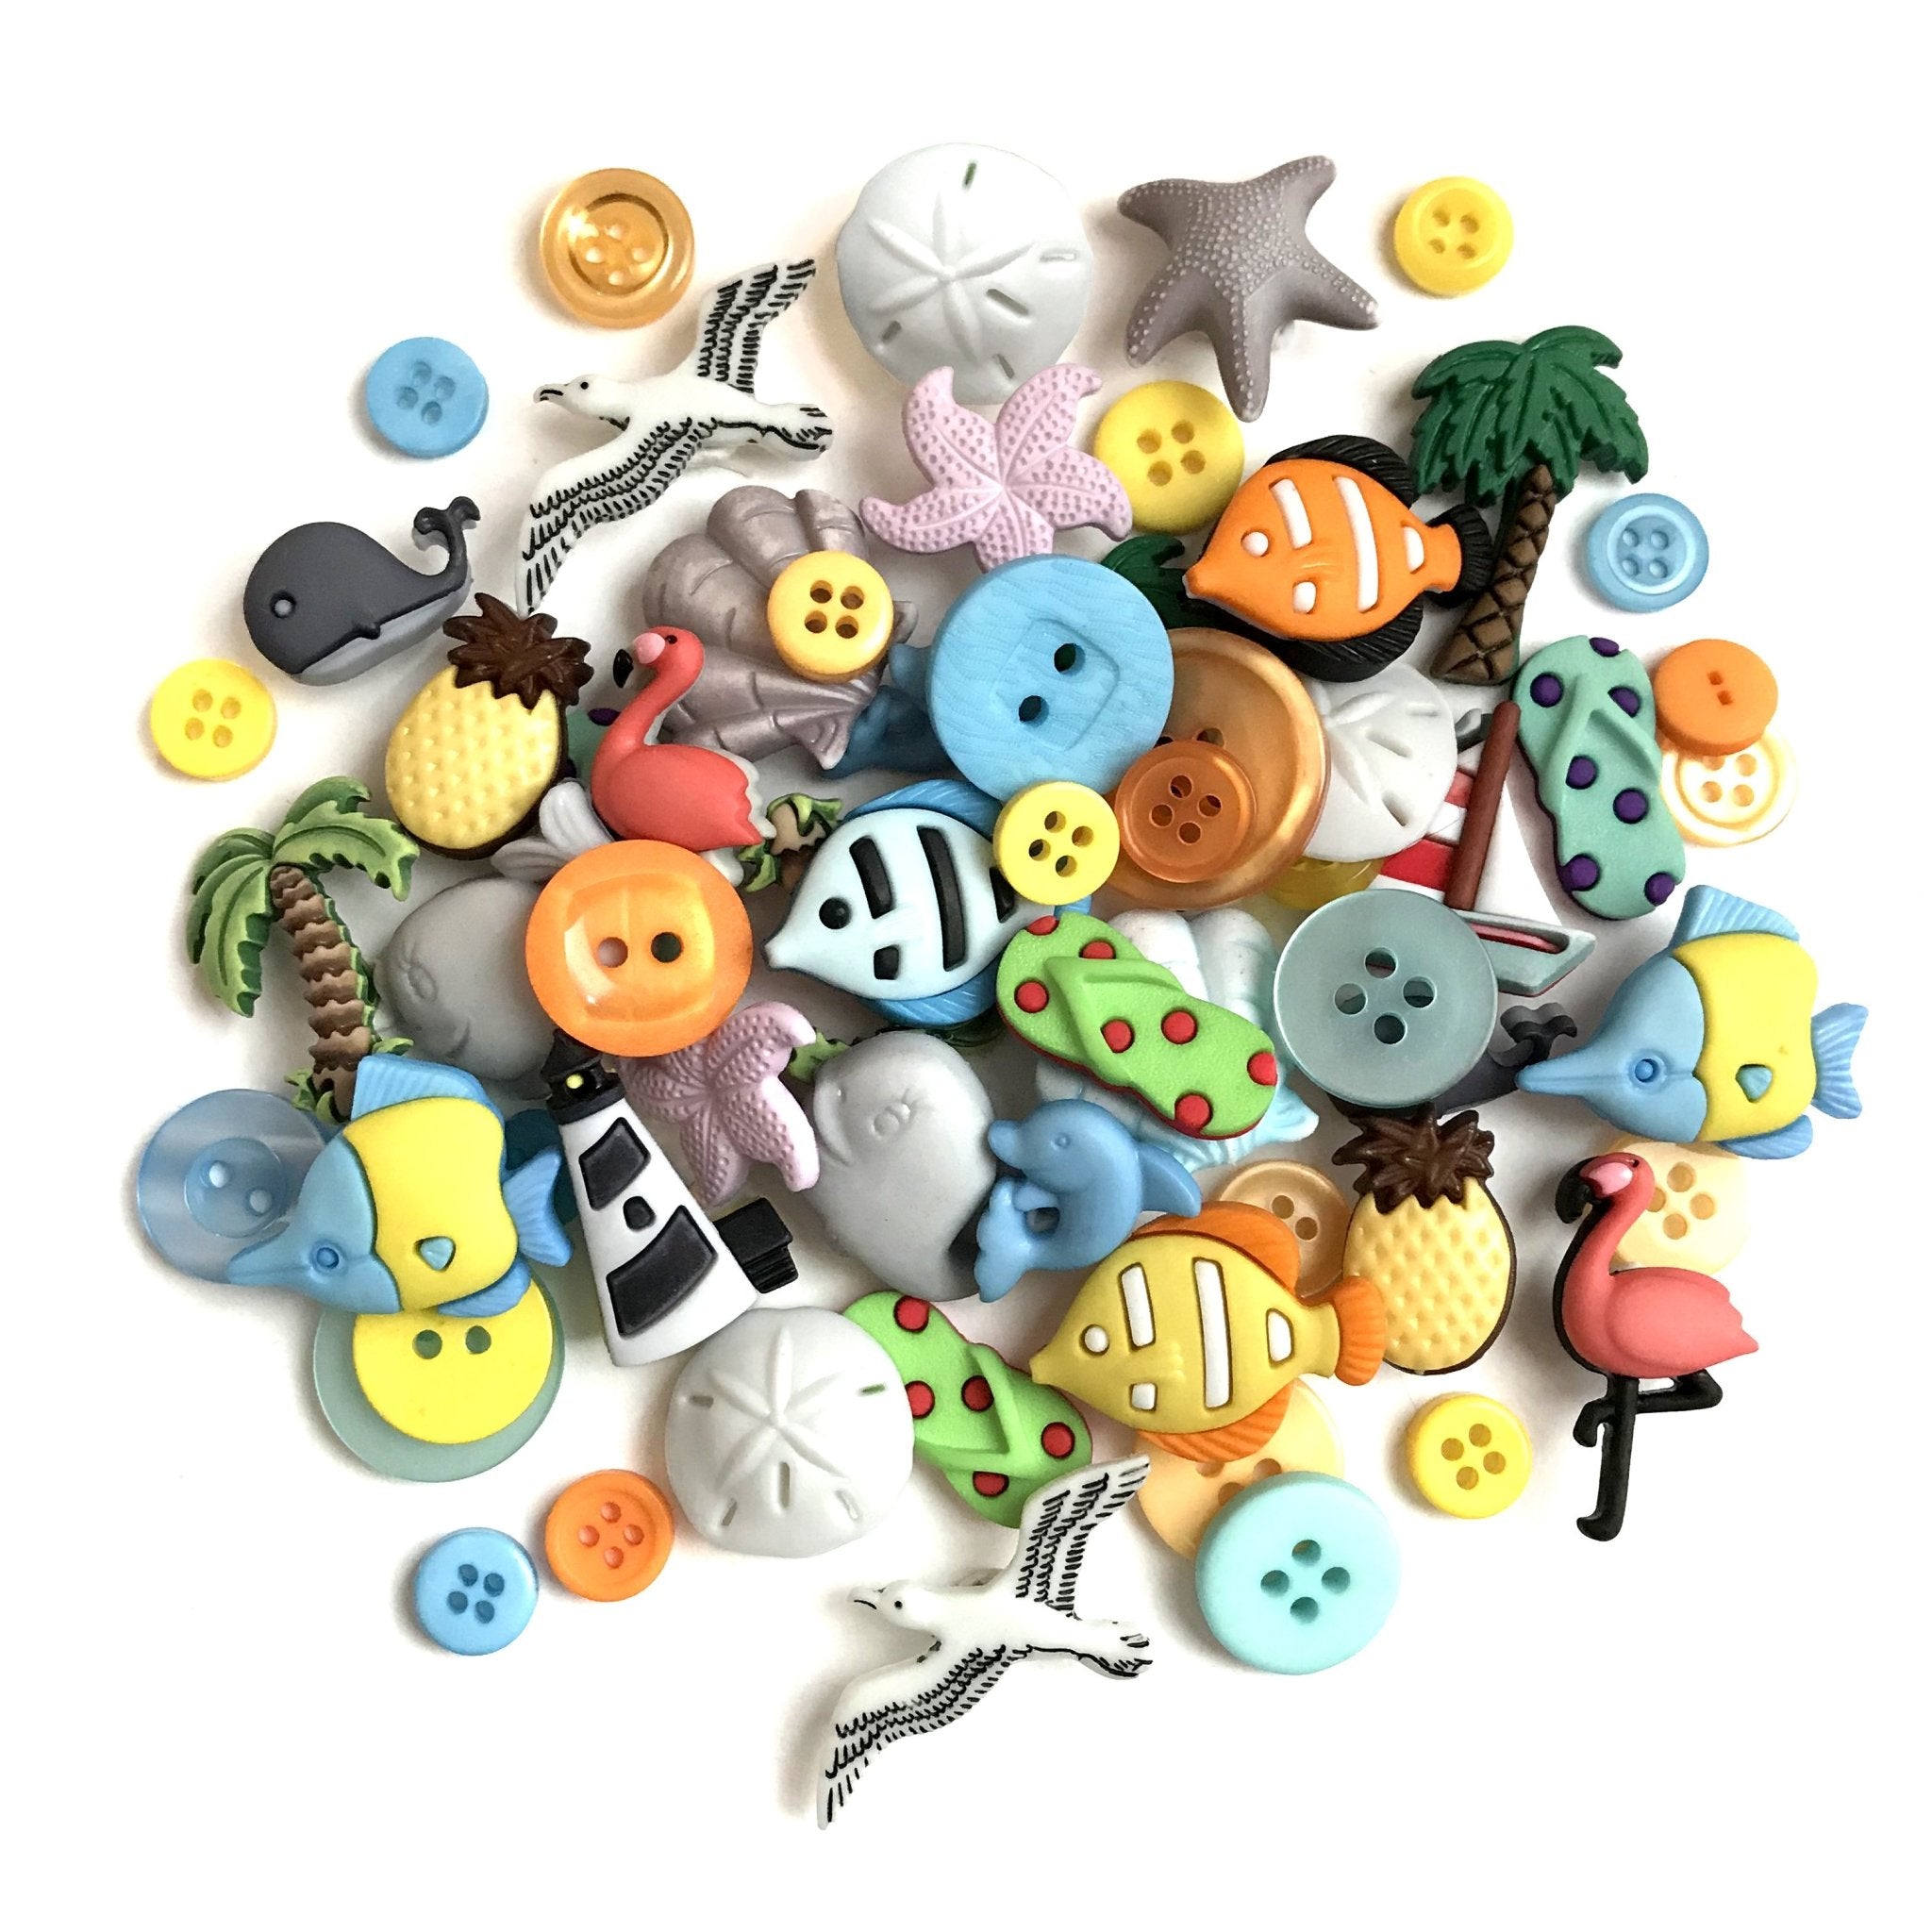 Buttons Galore Value Pack of Buttons for Crafts and Sewing-Beach and Nautical- 50+ Buttons